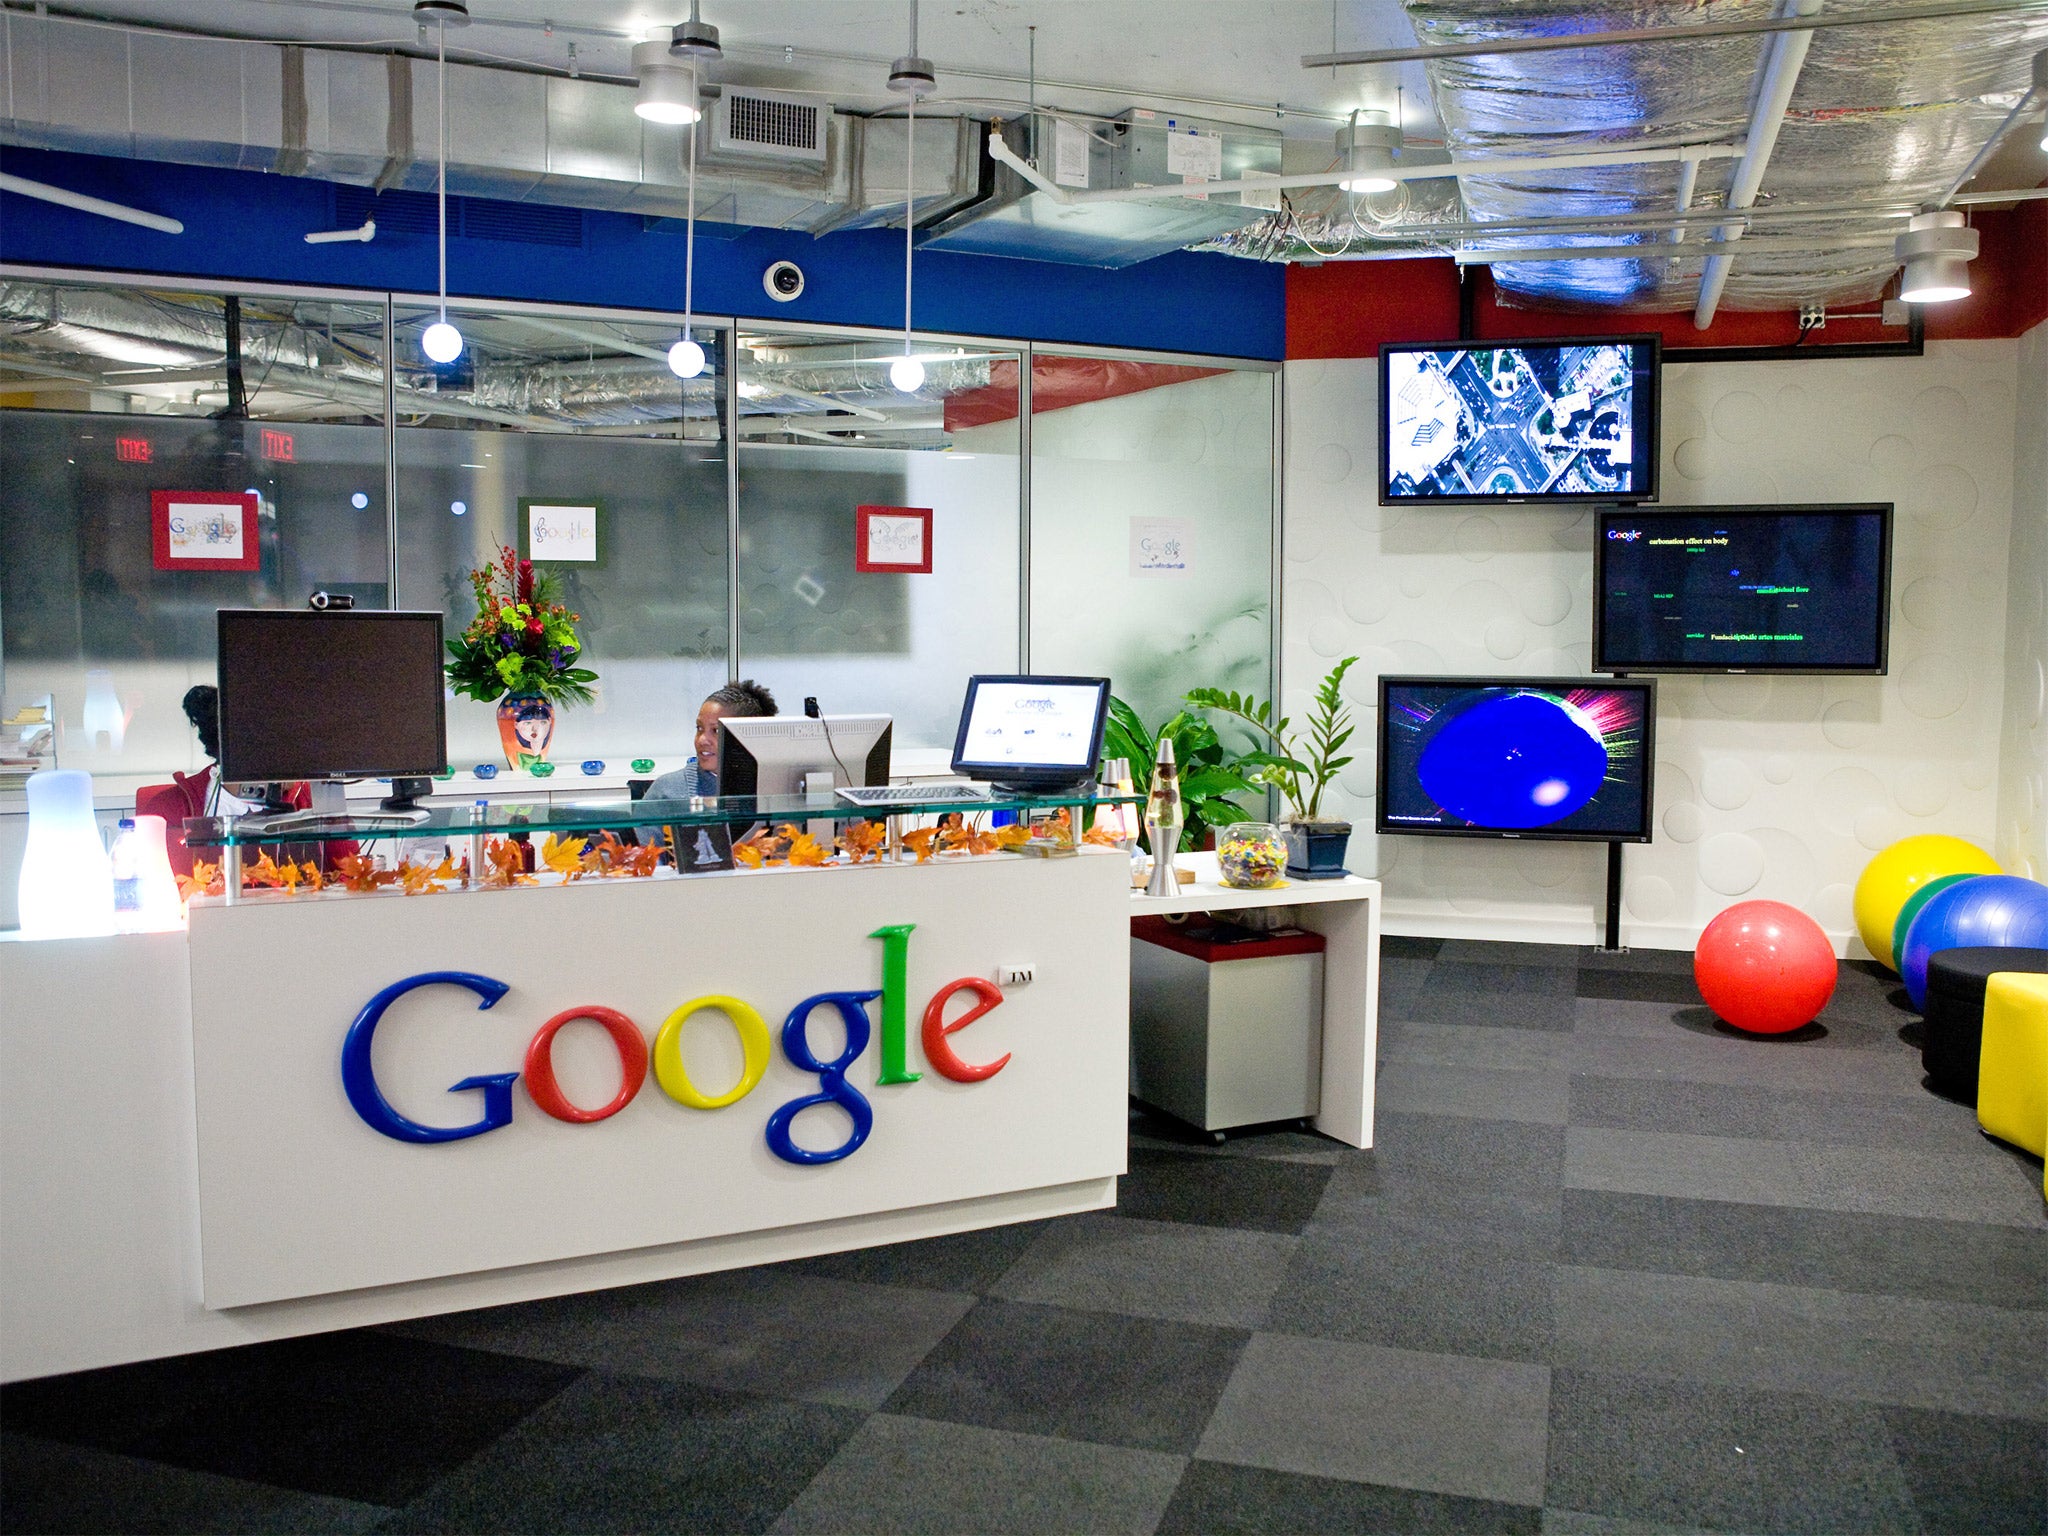 A reception area at Google's offices in Washington